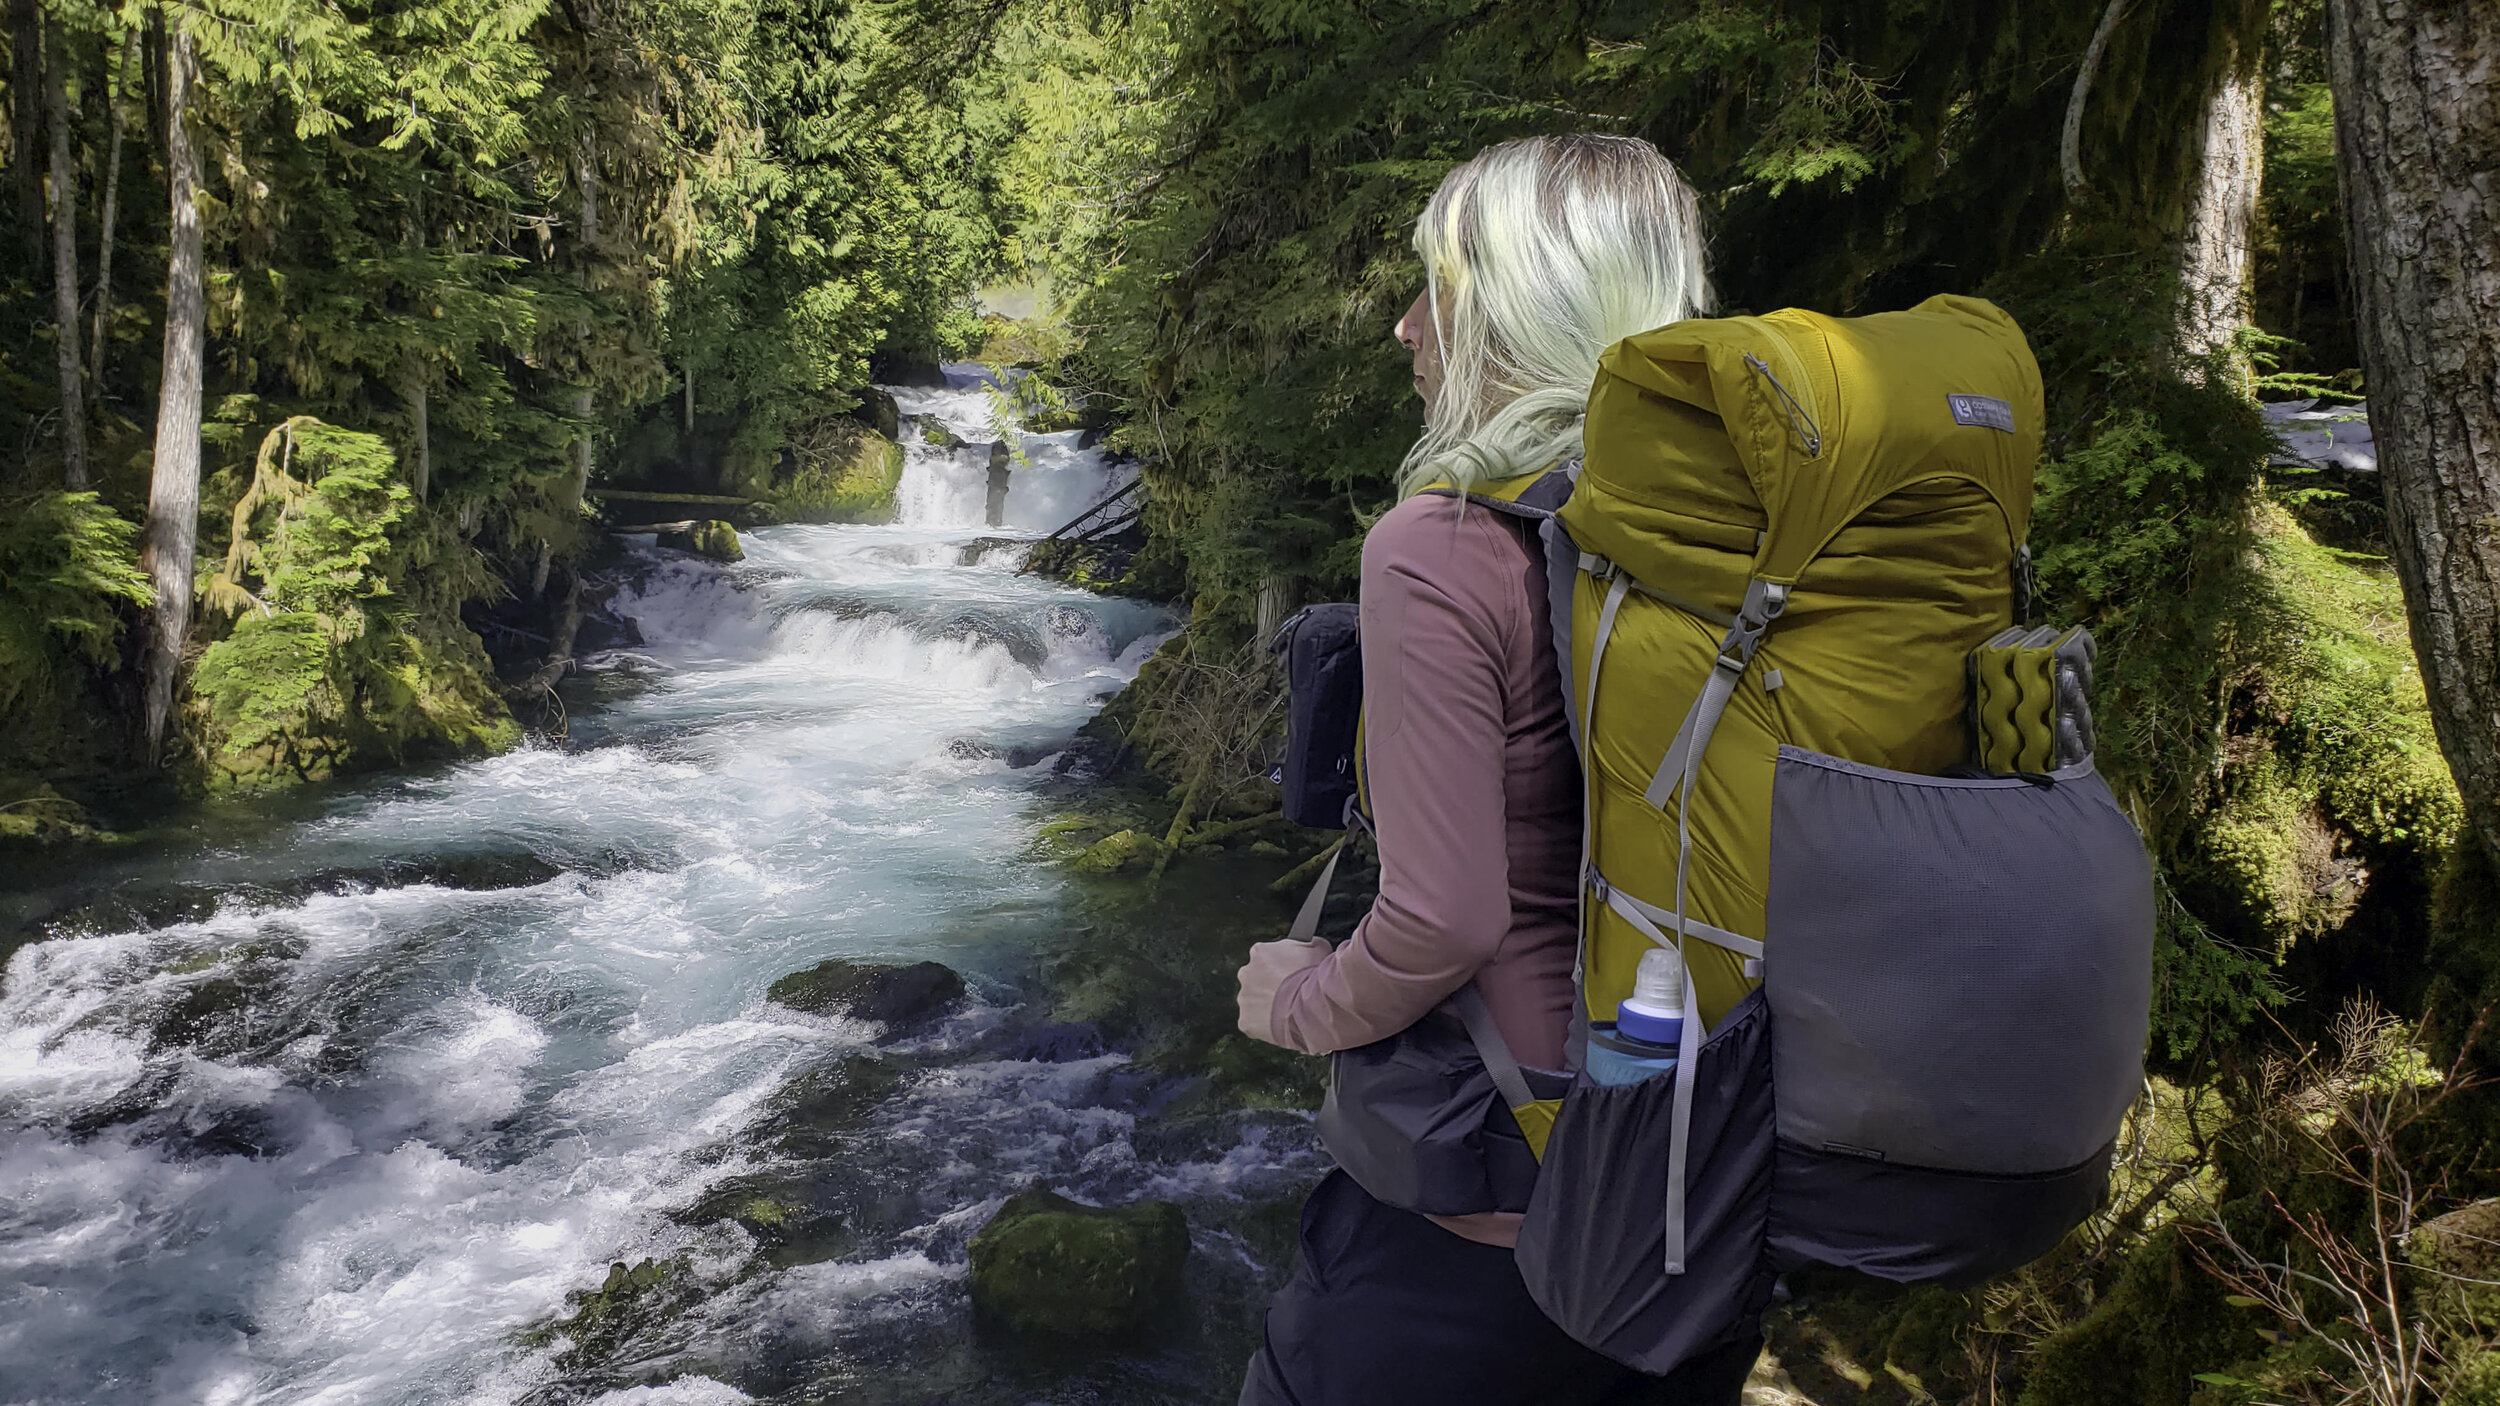 A hiker wearing the Gossamer Gear Gorilla 50 backpack in front of a river view